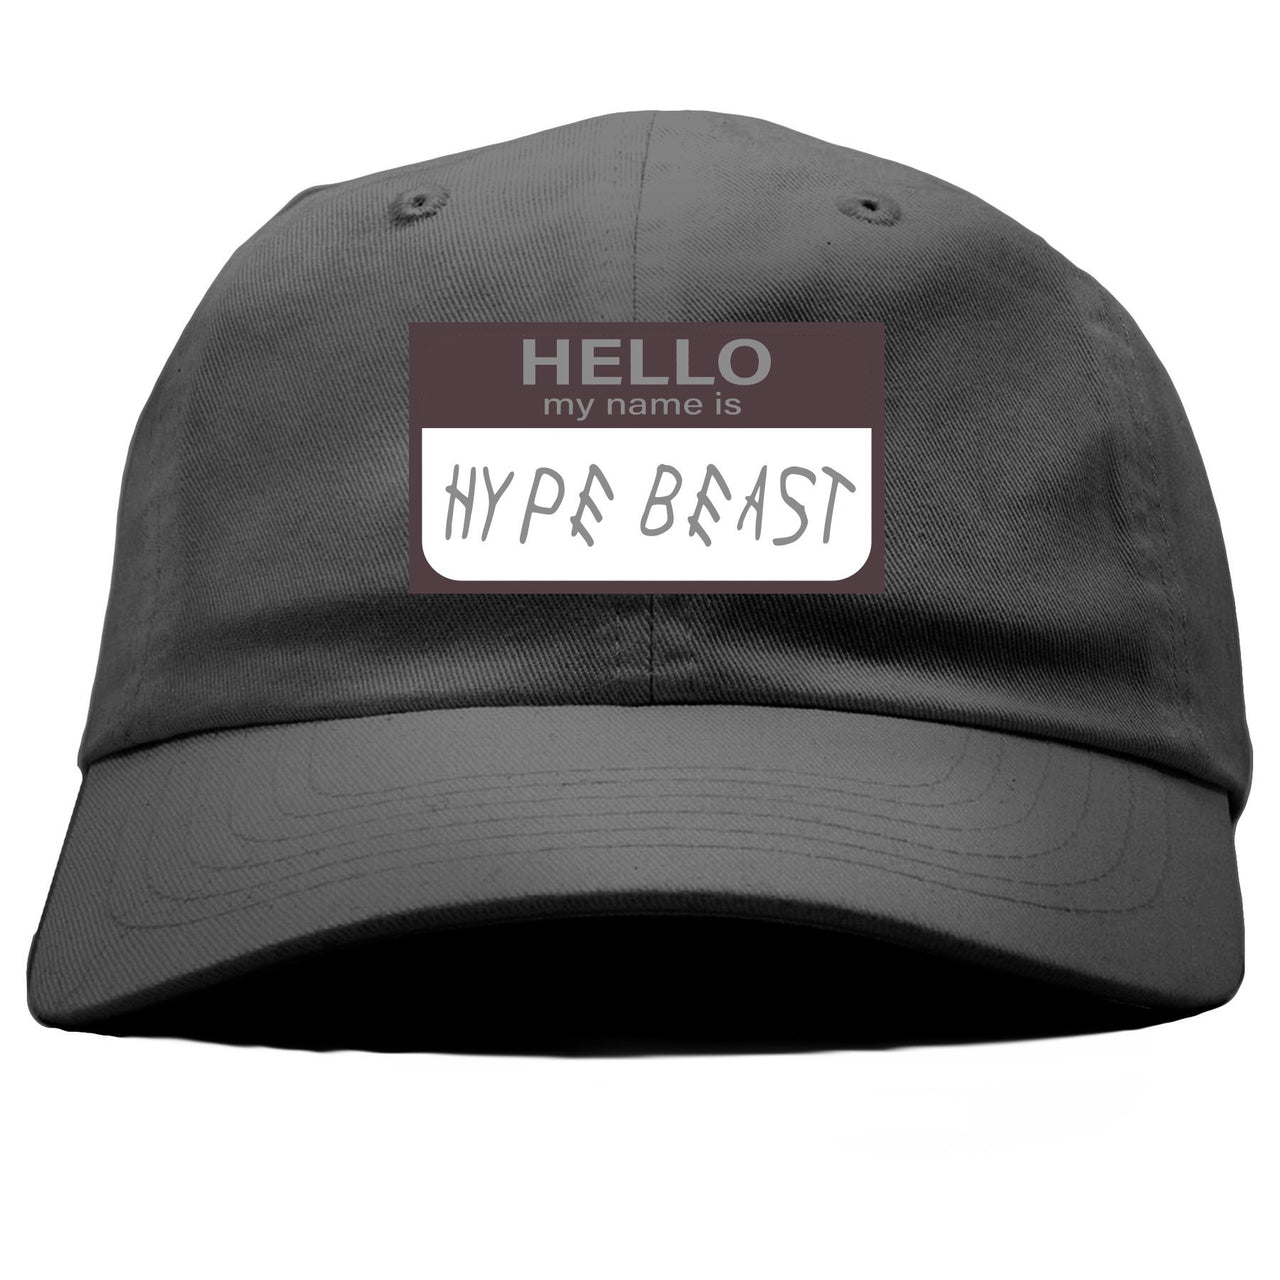 Geode 700s Dad Hat | Hello My Name Is Hype Beast Woe, Gray